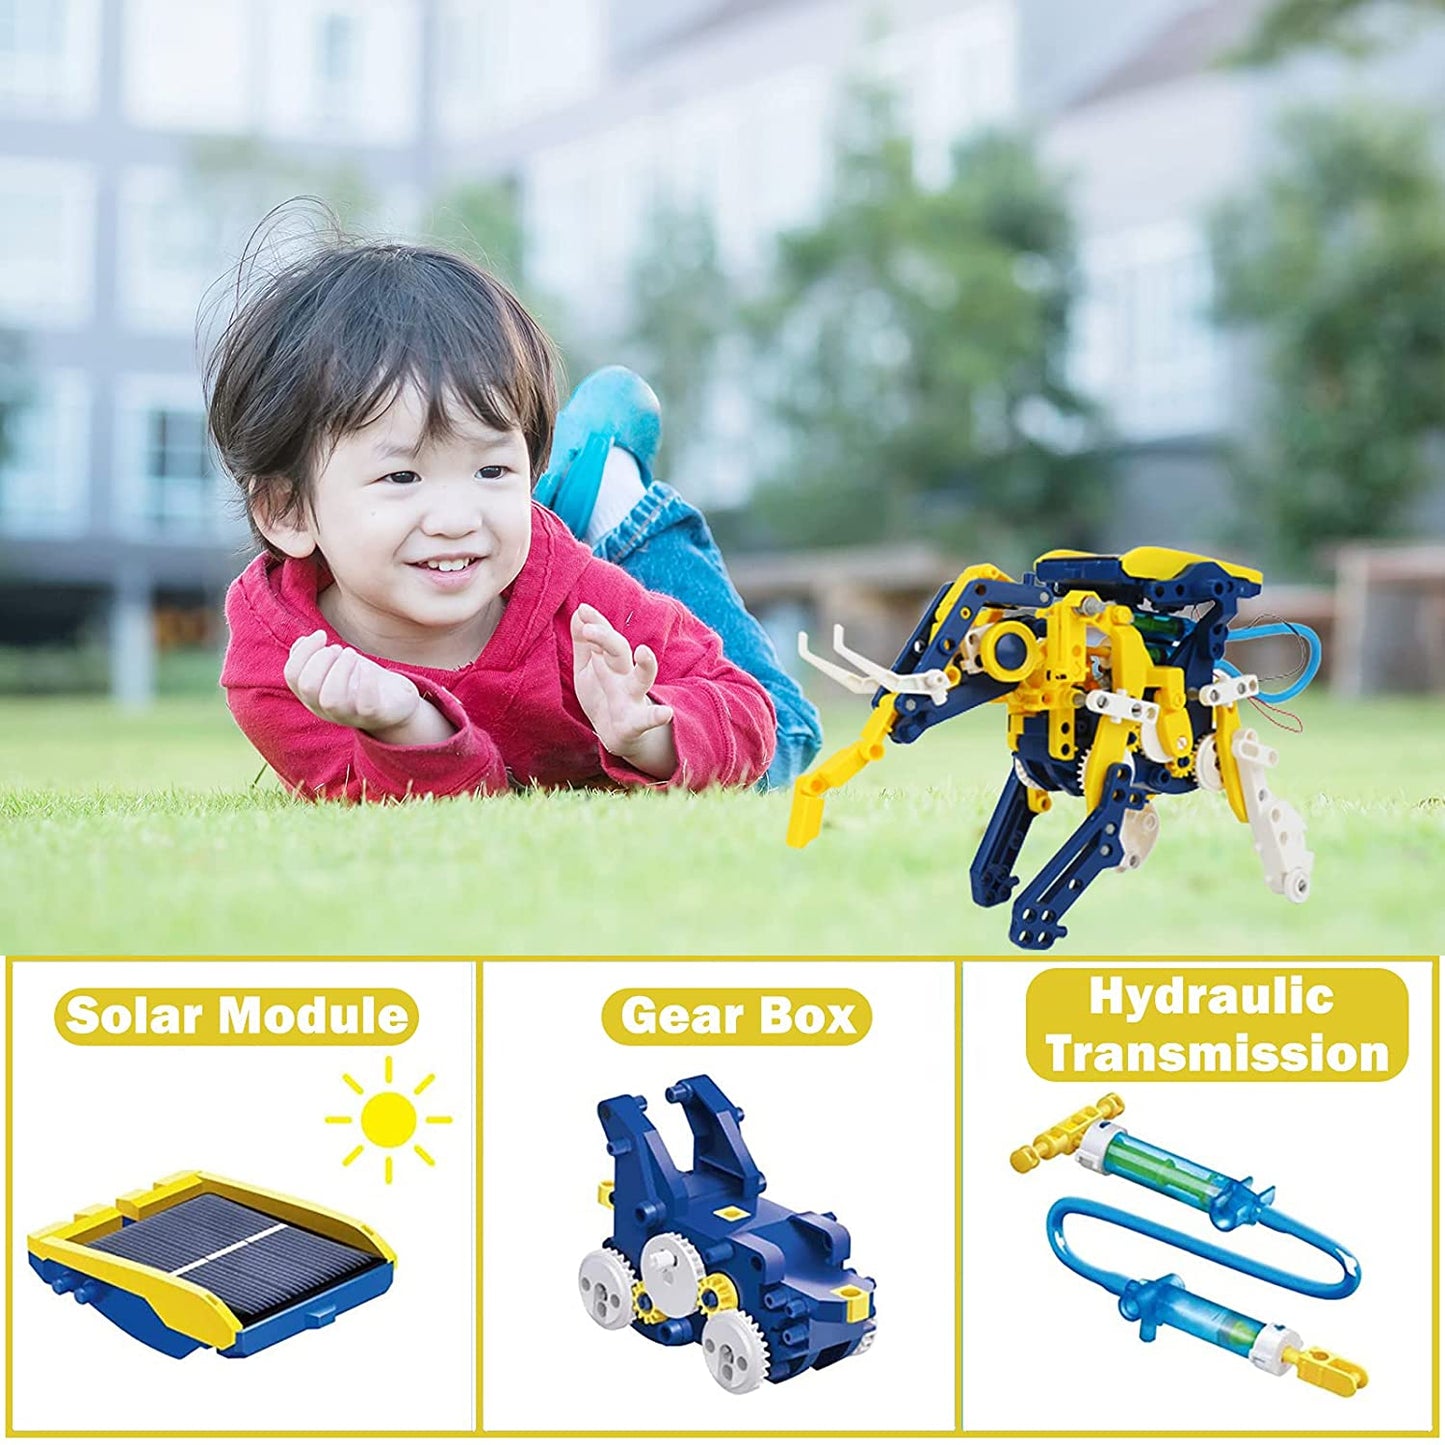 Vextronic Powered Robot Toys DIY Science Education Creation Building Kits for Kids Ages 8-12 and Older, Gift Ideas Engineering Toy for Teen 8 9 10 11 12 Years Old Boys Girls